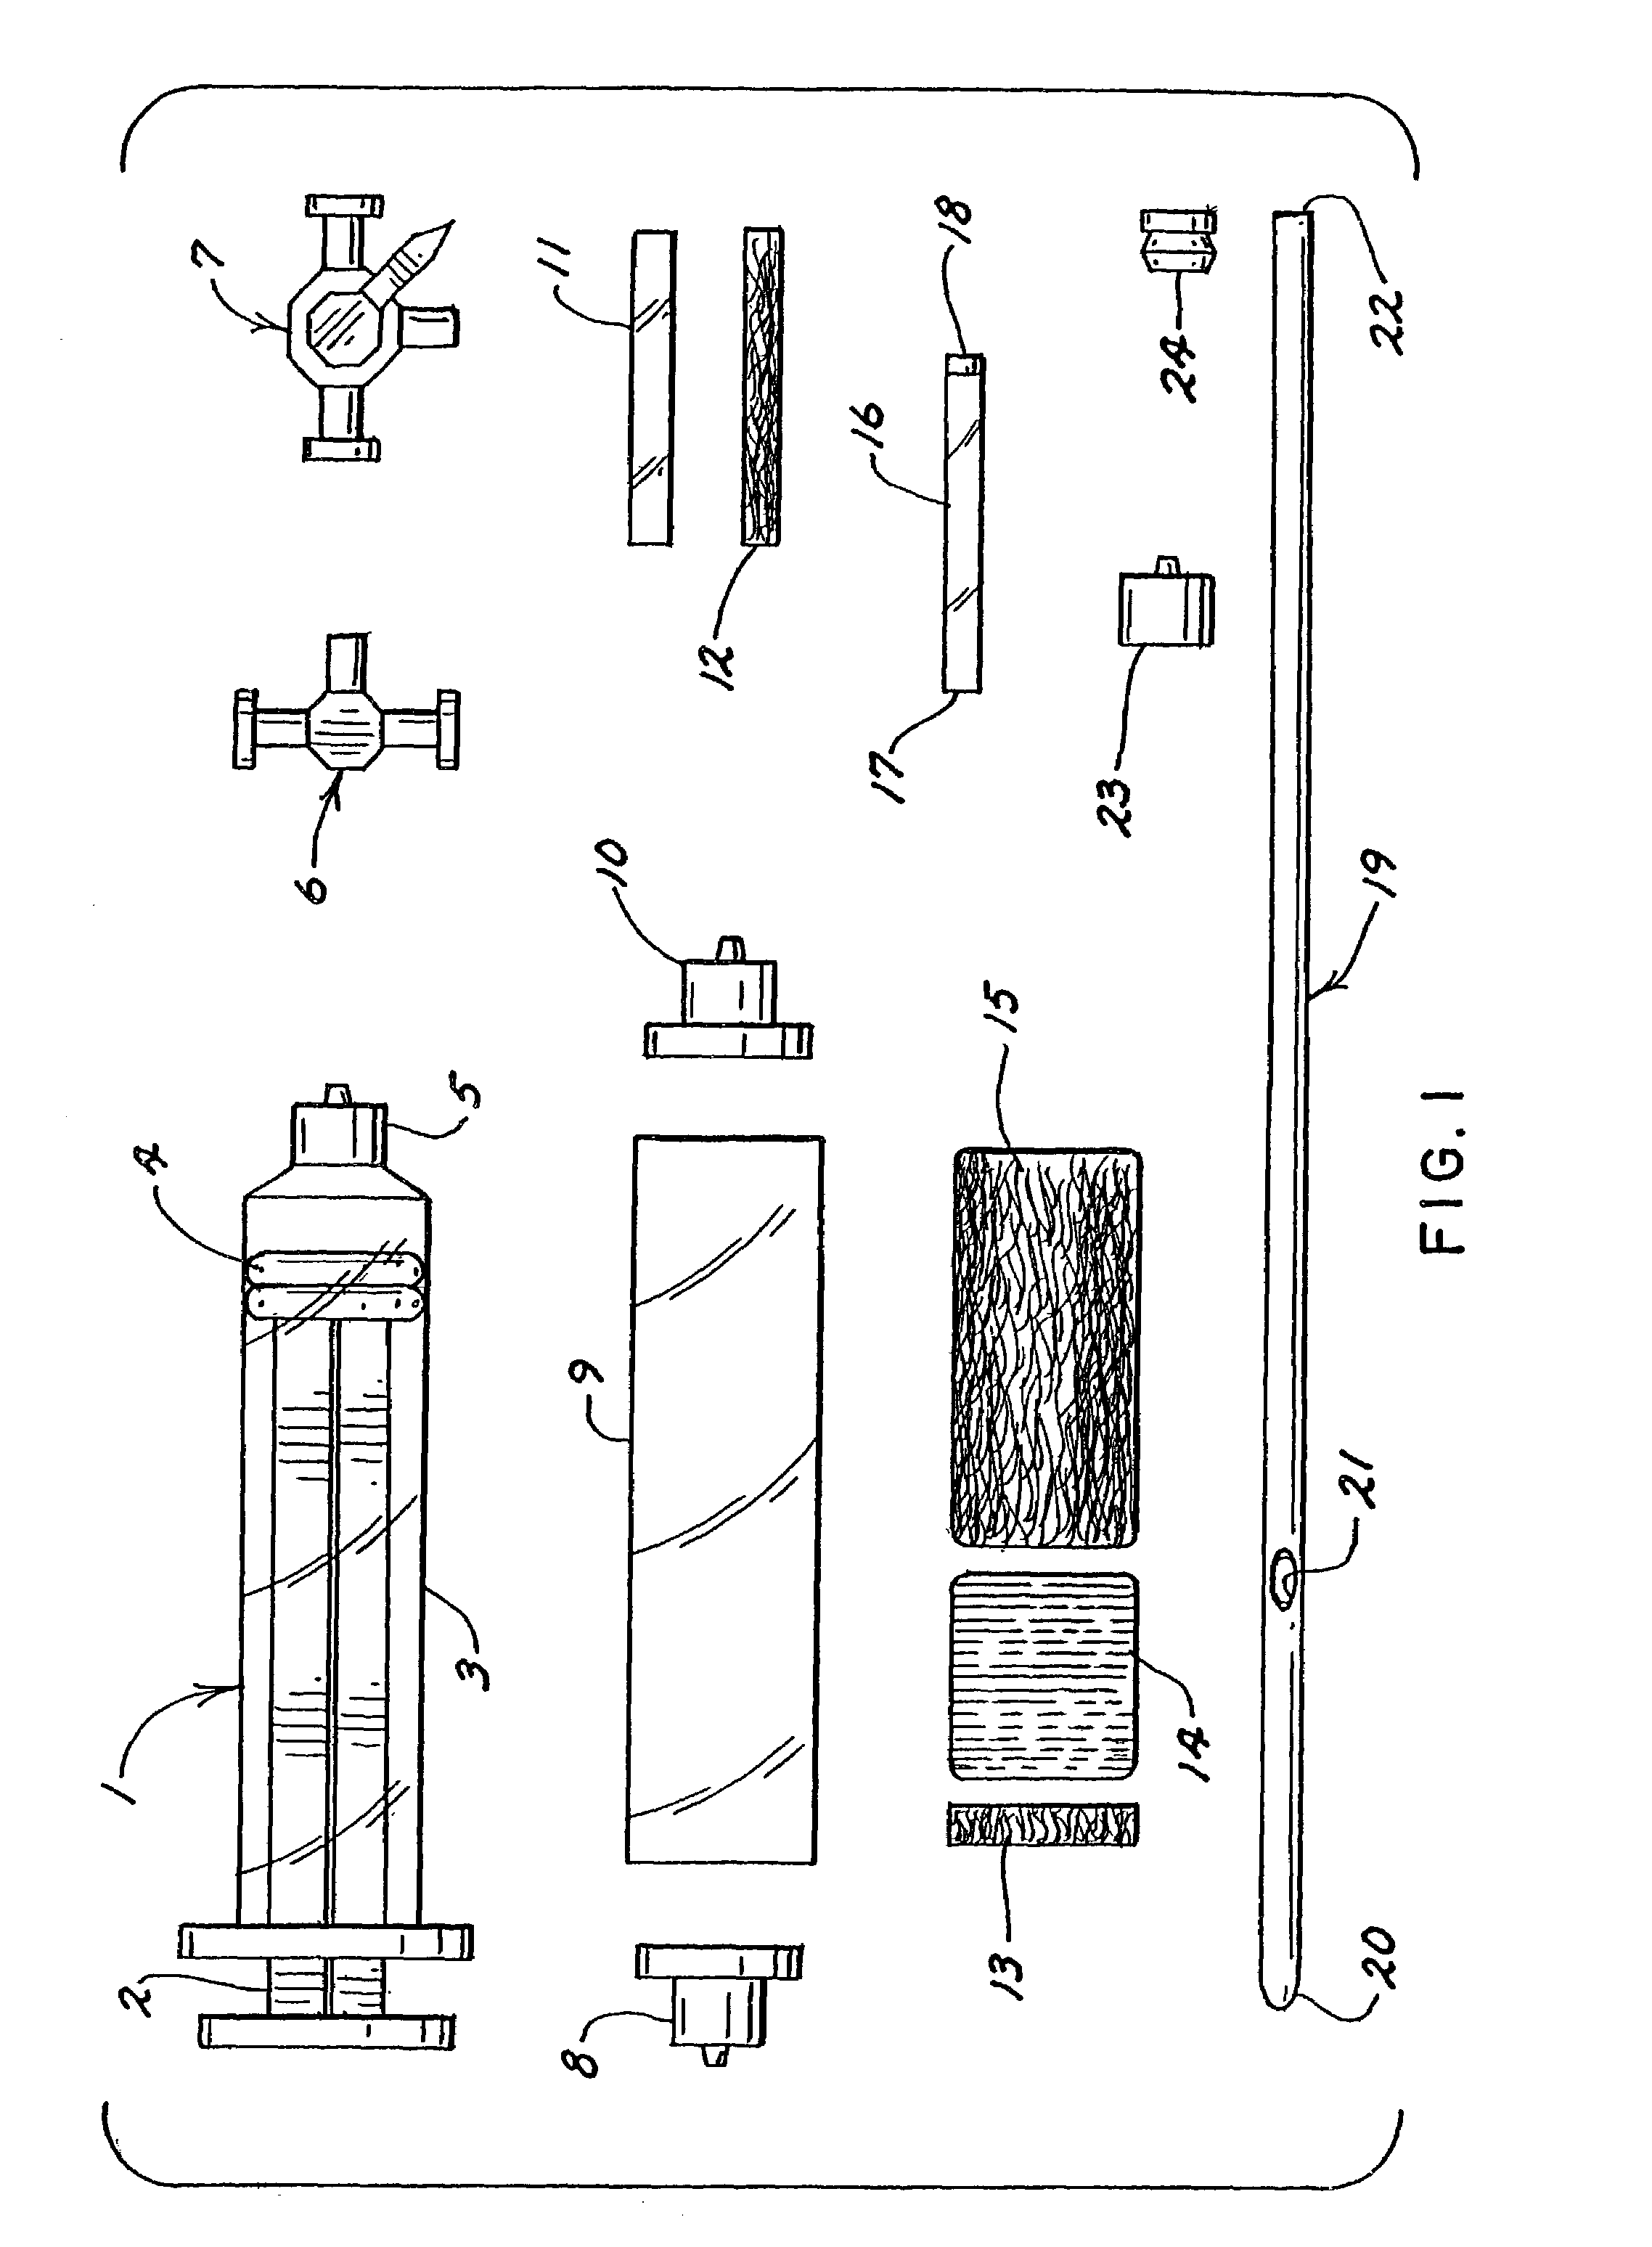 Clotting cascade initiating apparatus and methods of use and methods of closing wounds